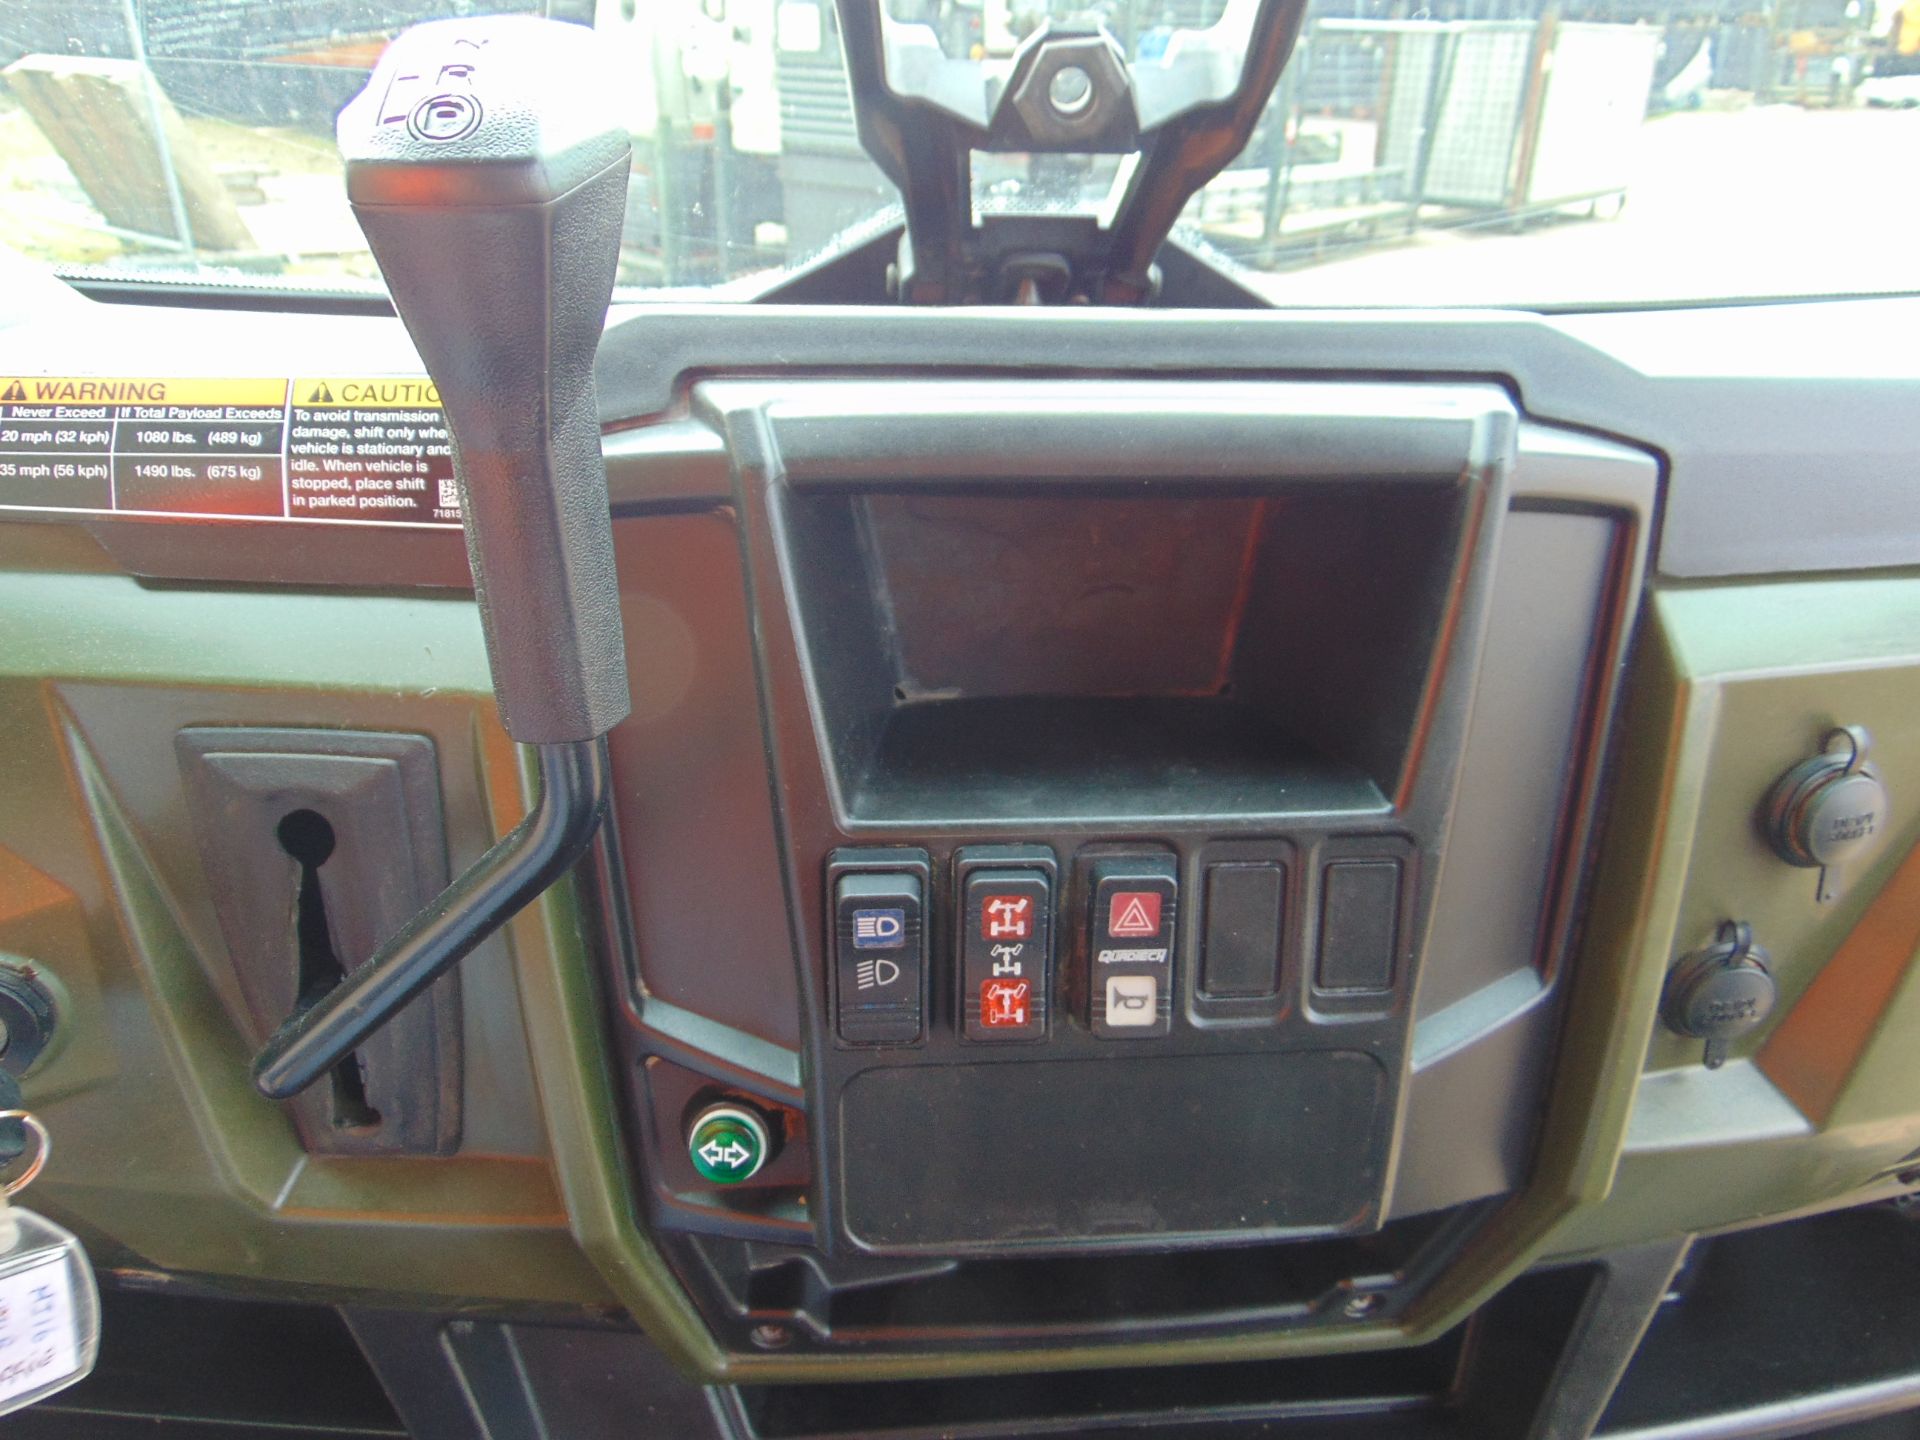 Polaris Ranger Crew Cab Diesel Utility Vehicle 1,190 Hrs only from Govt Dept - Image 19 of 25